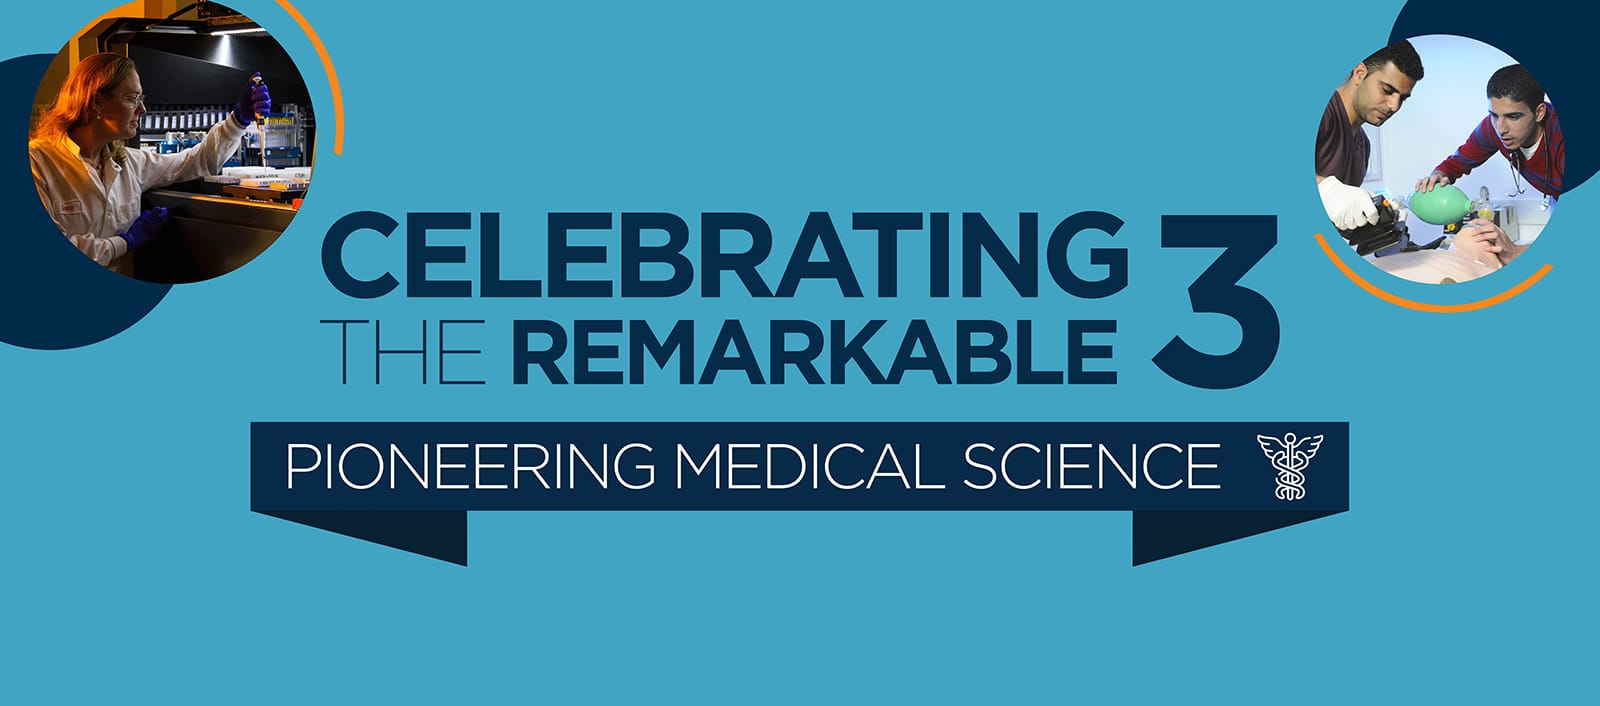 Celebrating the Remarkable 3: Pioneering Medical Science - A4BGU